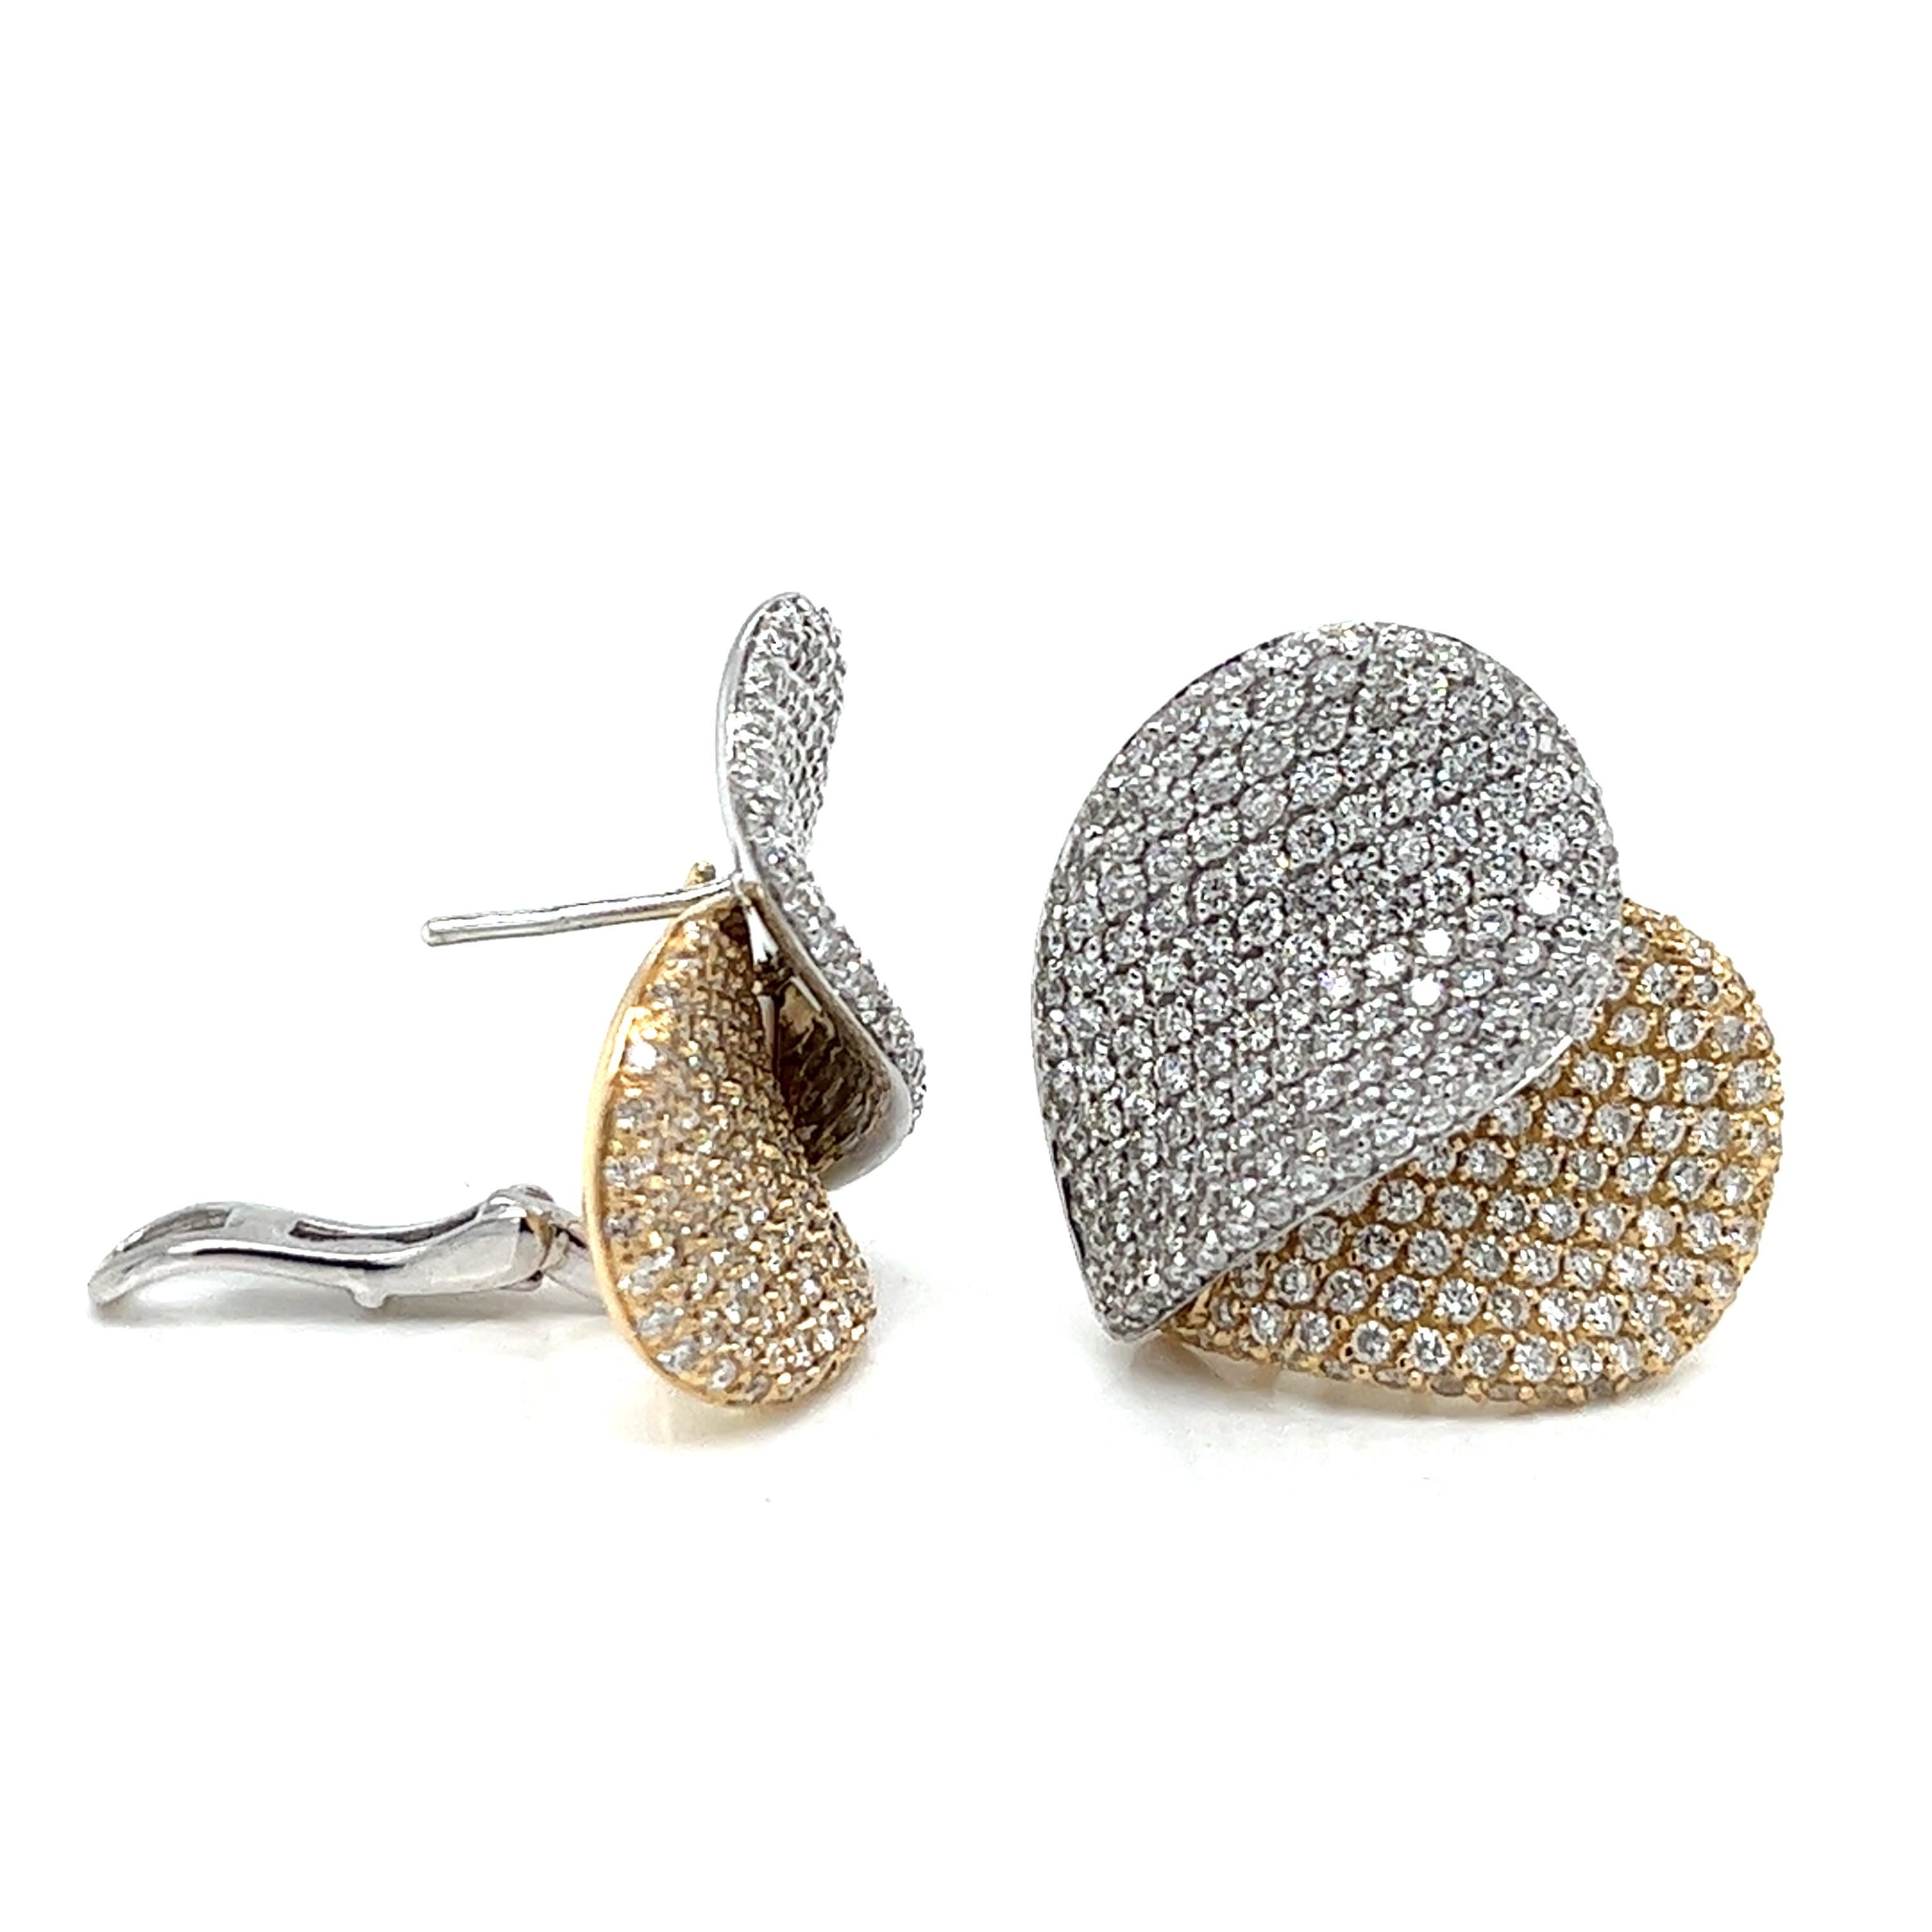 Giorgio Visconti is known for exquisite jewelry designs, and this earring and ring set sounds stunning. It features 18kt gold with a combination of white and yellow, in a gorgeous pavé design, combining elegance and luxury in a single piece. This